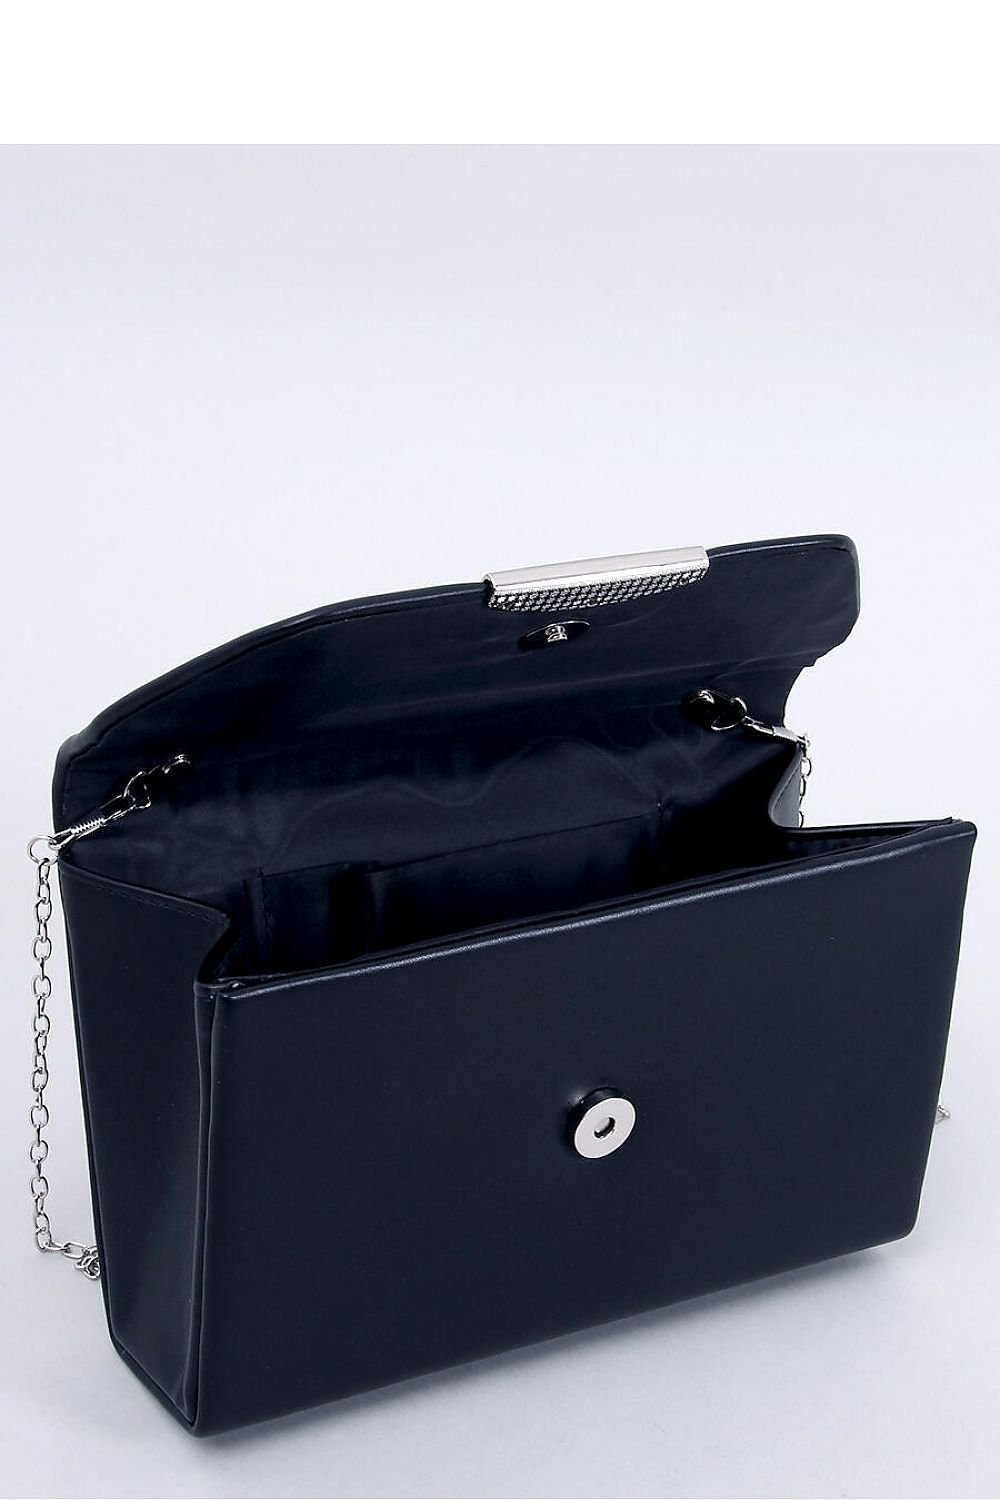 Envelope clutch bag - M&H FashionEnvelope clutch bagM&H FashionM&H Fashion189625_1103883one-size-fits-allEnvelope clutch bag InelloM&H FashionM&H FashionMatte handbag for women ? clutch bag in black color. Classics are always in fashion.... It can be worn in two ways ? in hand or on a silver chain attached to it. It Envelope clutch bag